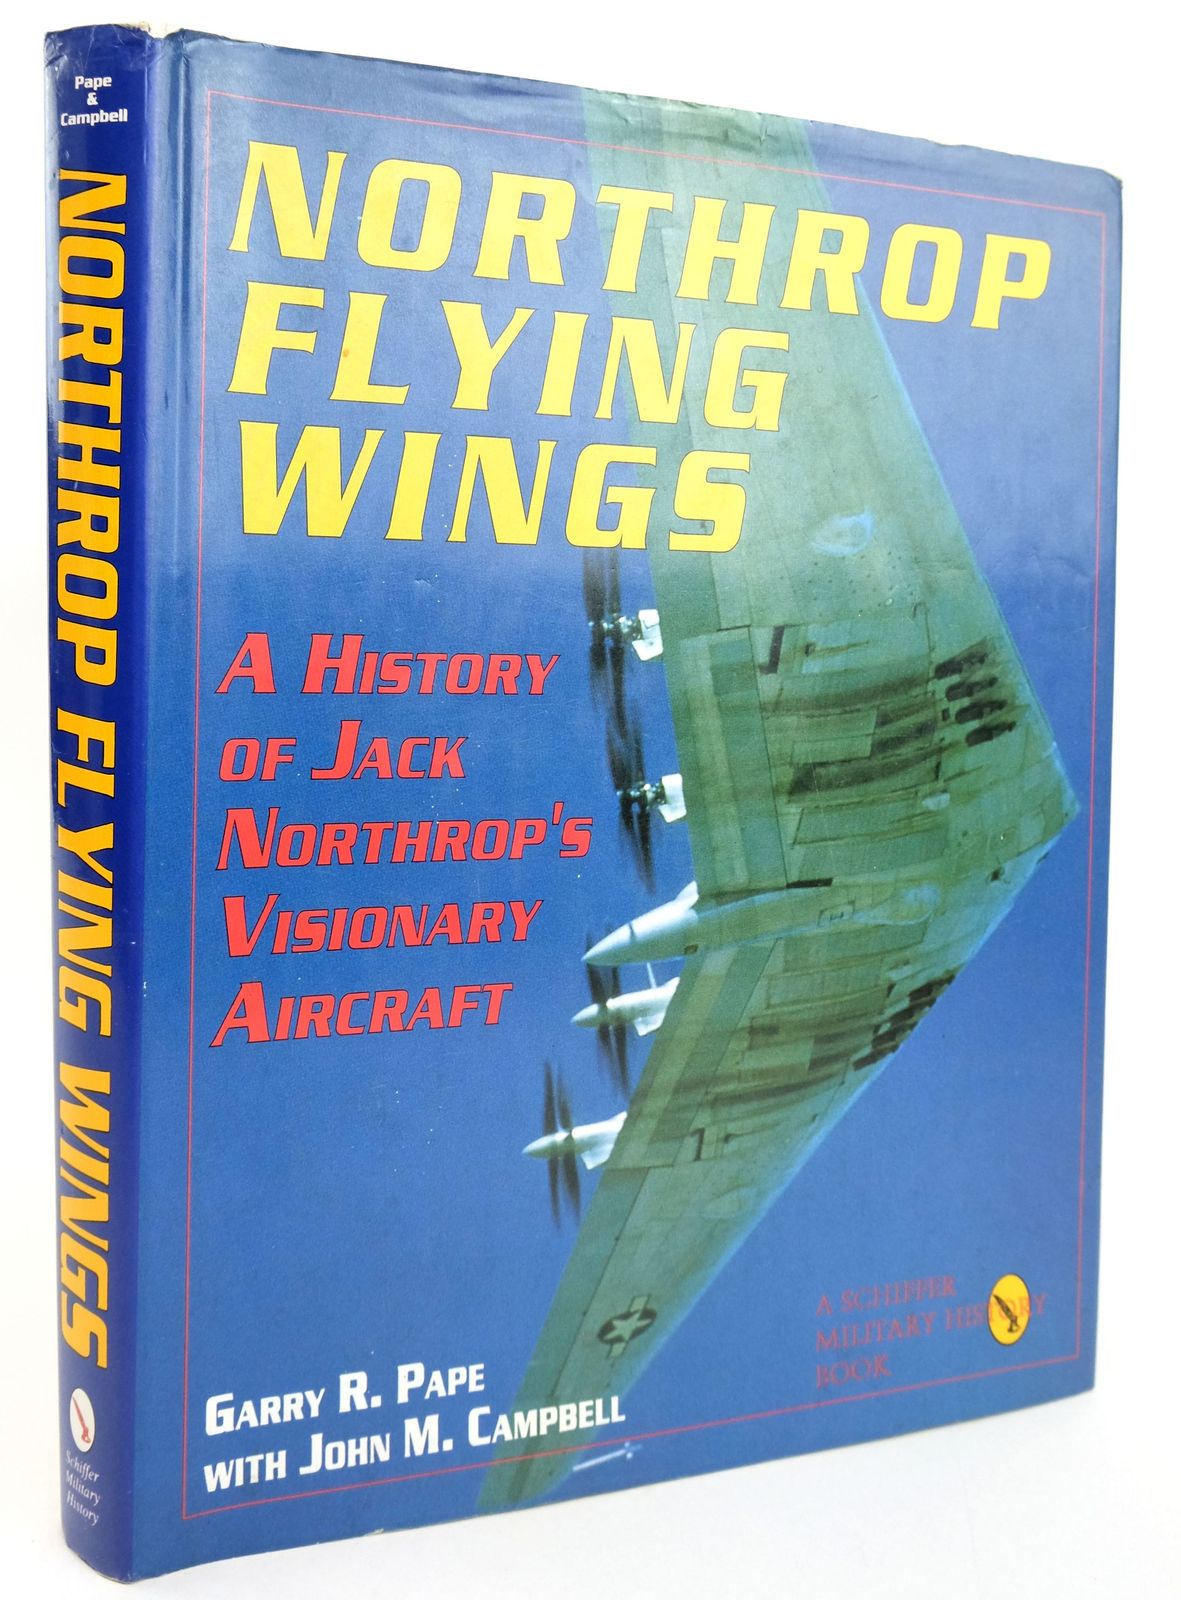 Photo of NORTHROP FLYING WINGS: A HISTORY OF JACK NORTHROP'S VISIONARY AIRCRAFT written by Pape, Garry R. Campbell, John M. published by Schiffer Publishing Ltd. (STOCK CODE: 1820083)  for sale by Stella & Rose's Books